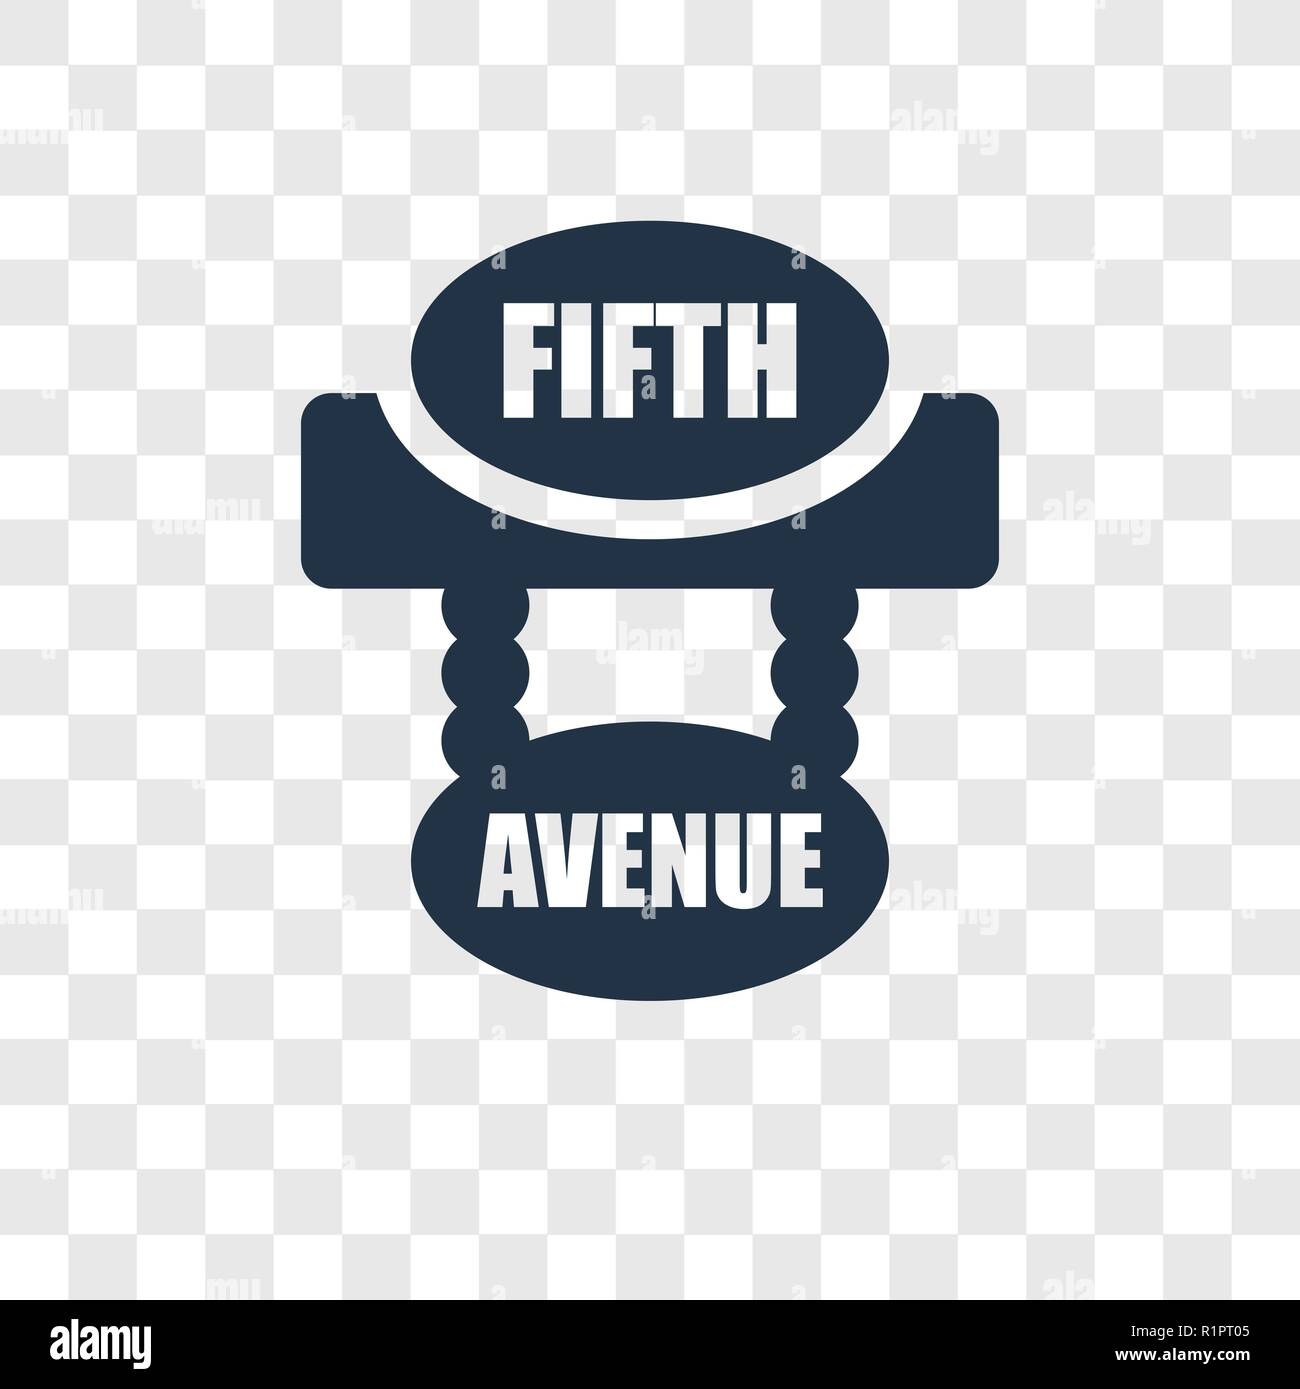 Fifth avenue vector icon isolated on transparent background, Fifth avenue transparency logo concept Stock Vector